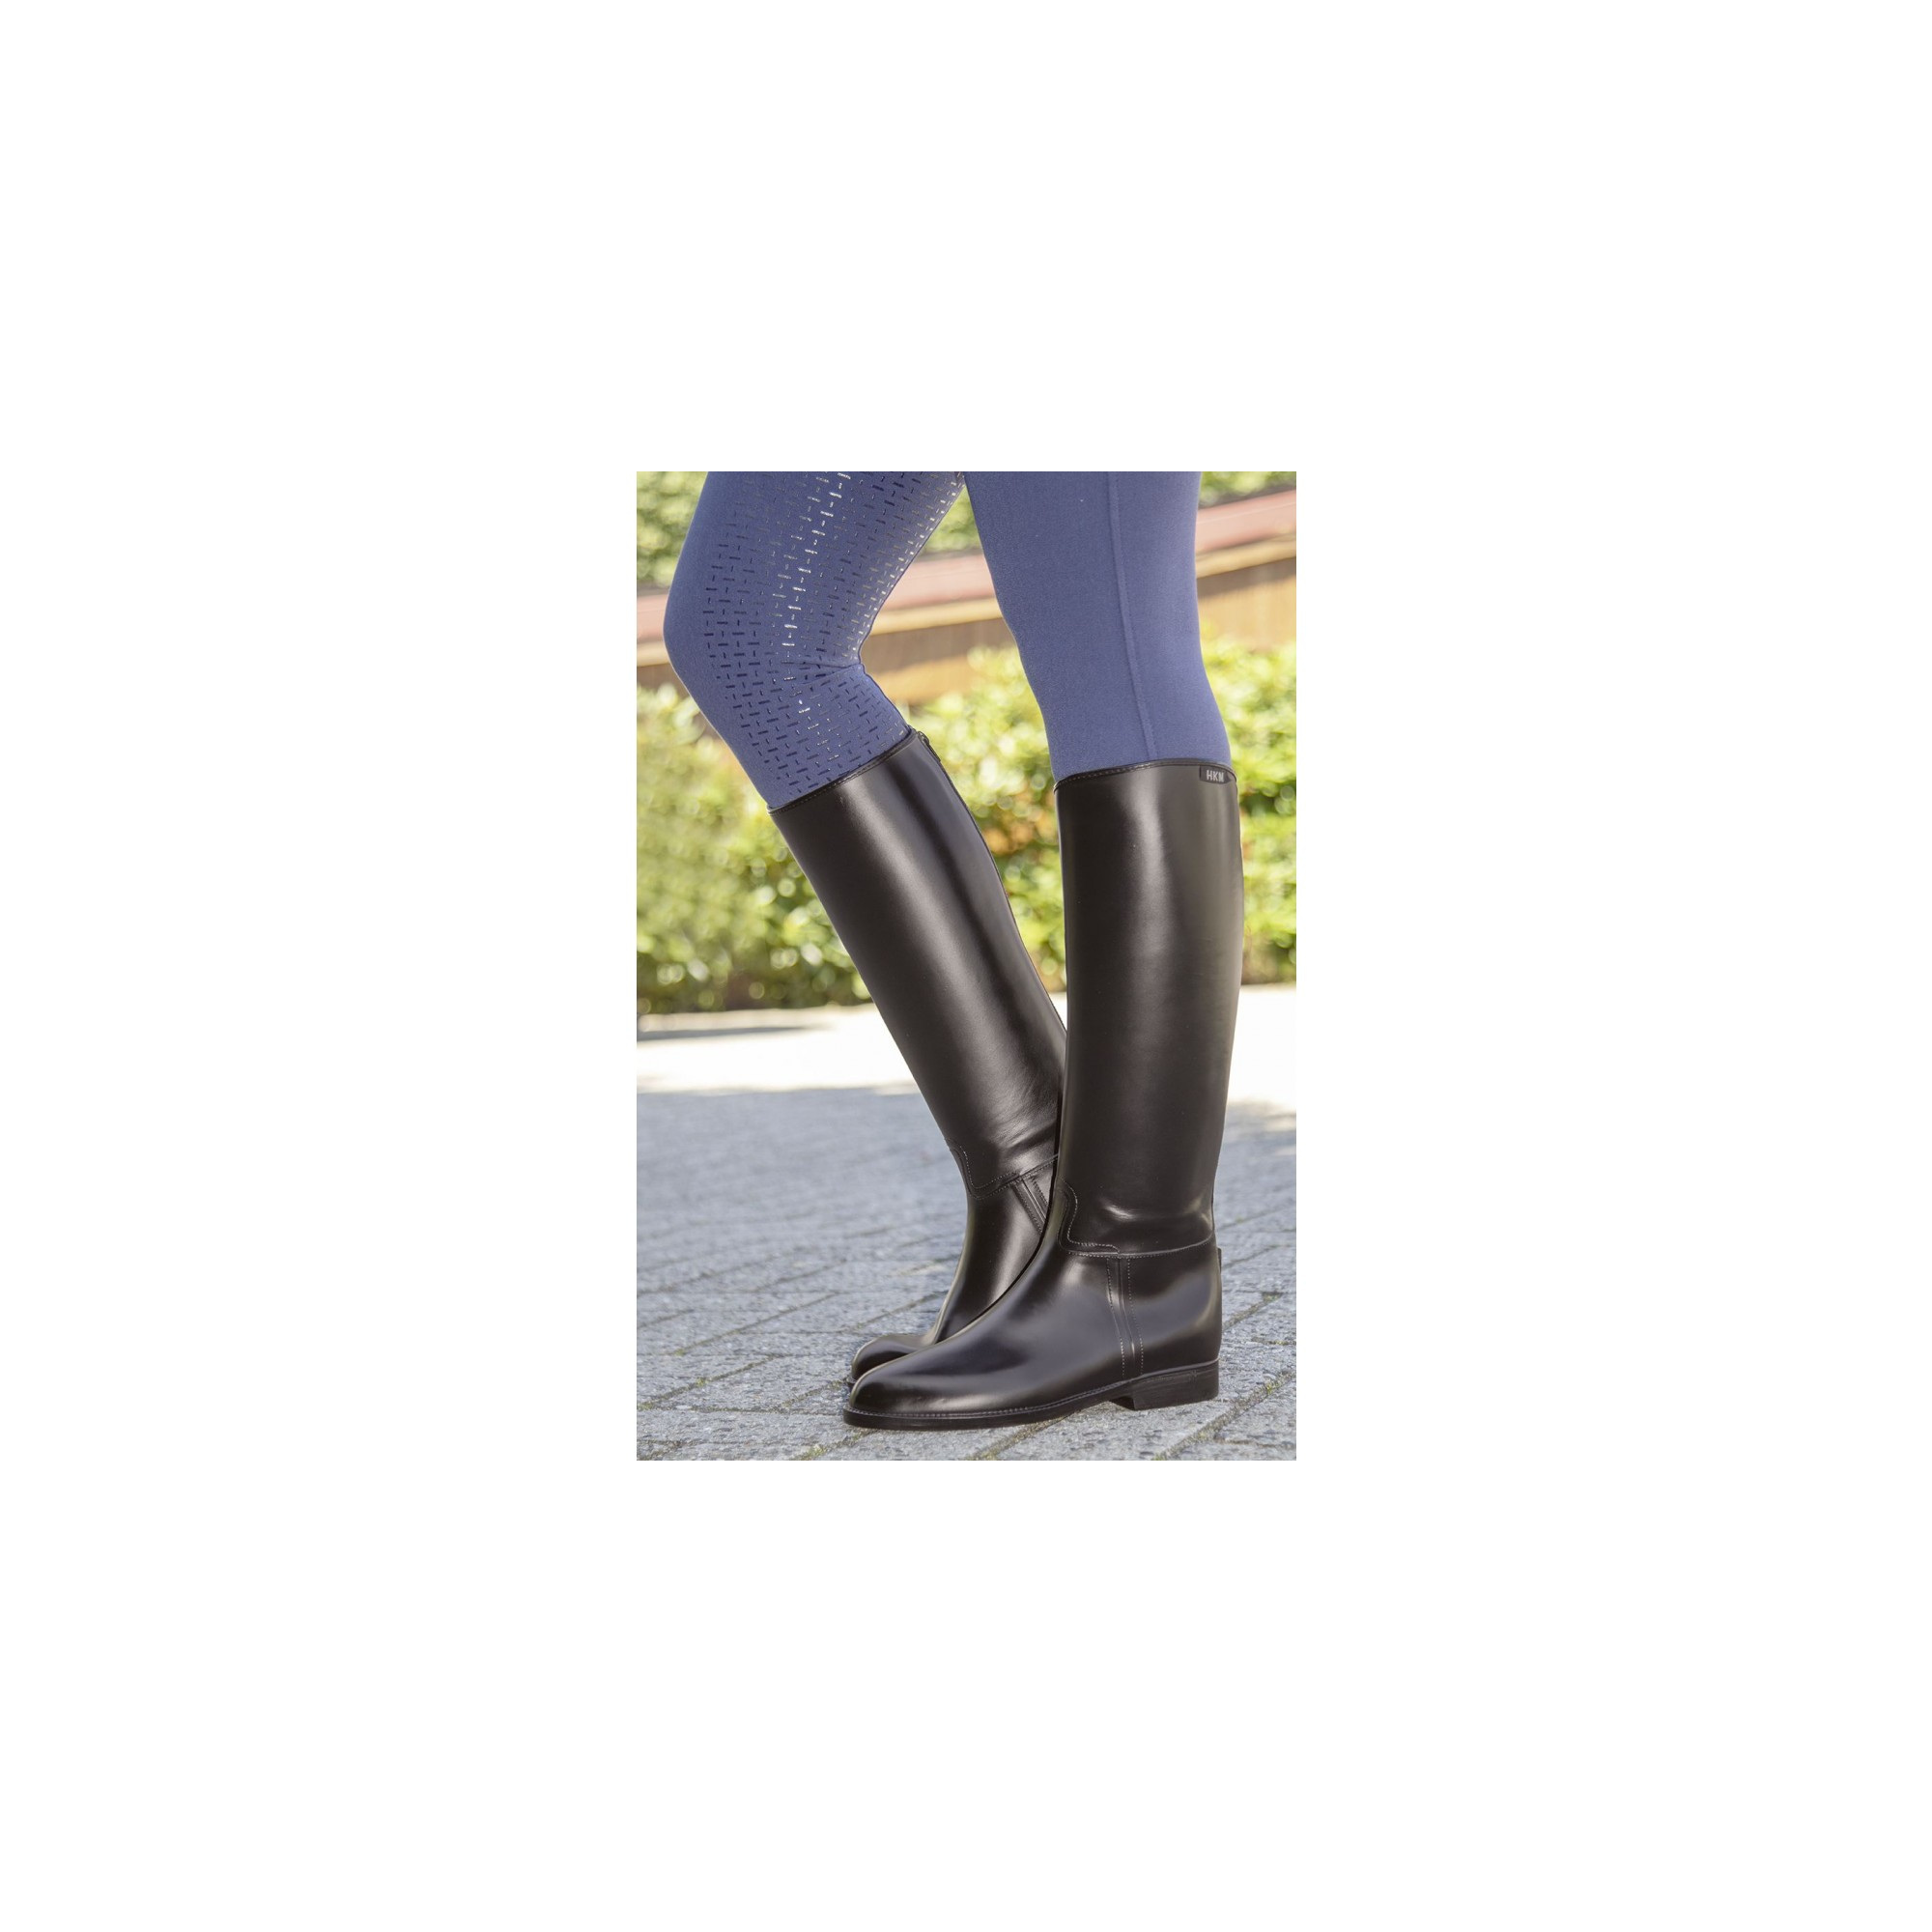 HKM Gijon Womens Horse Riding Equestrian Tall Boots Regular Real Leather Short 